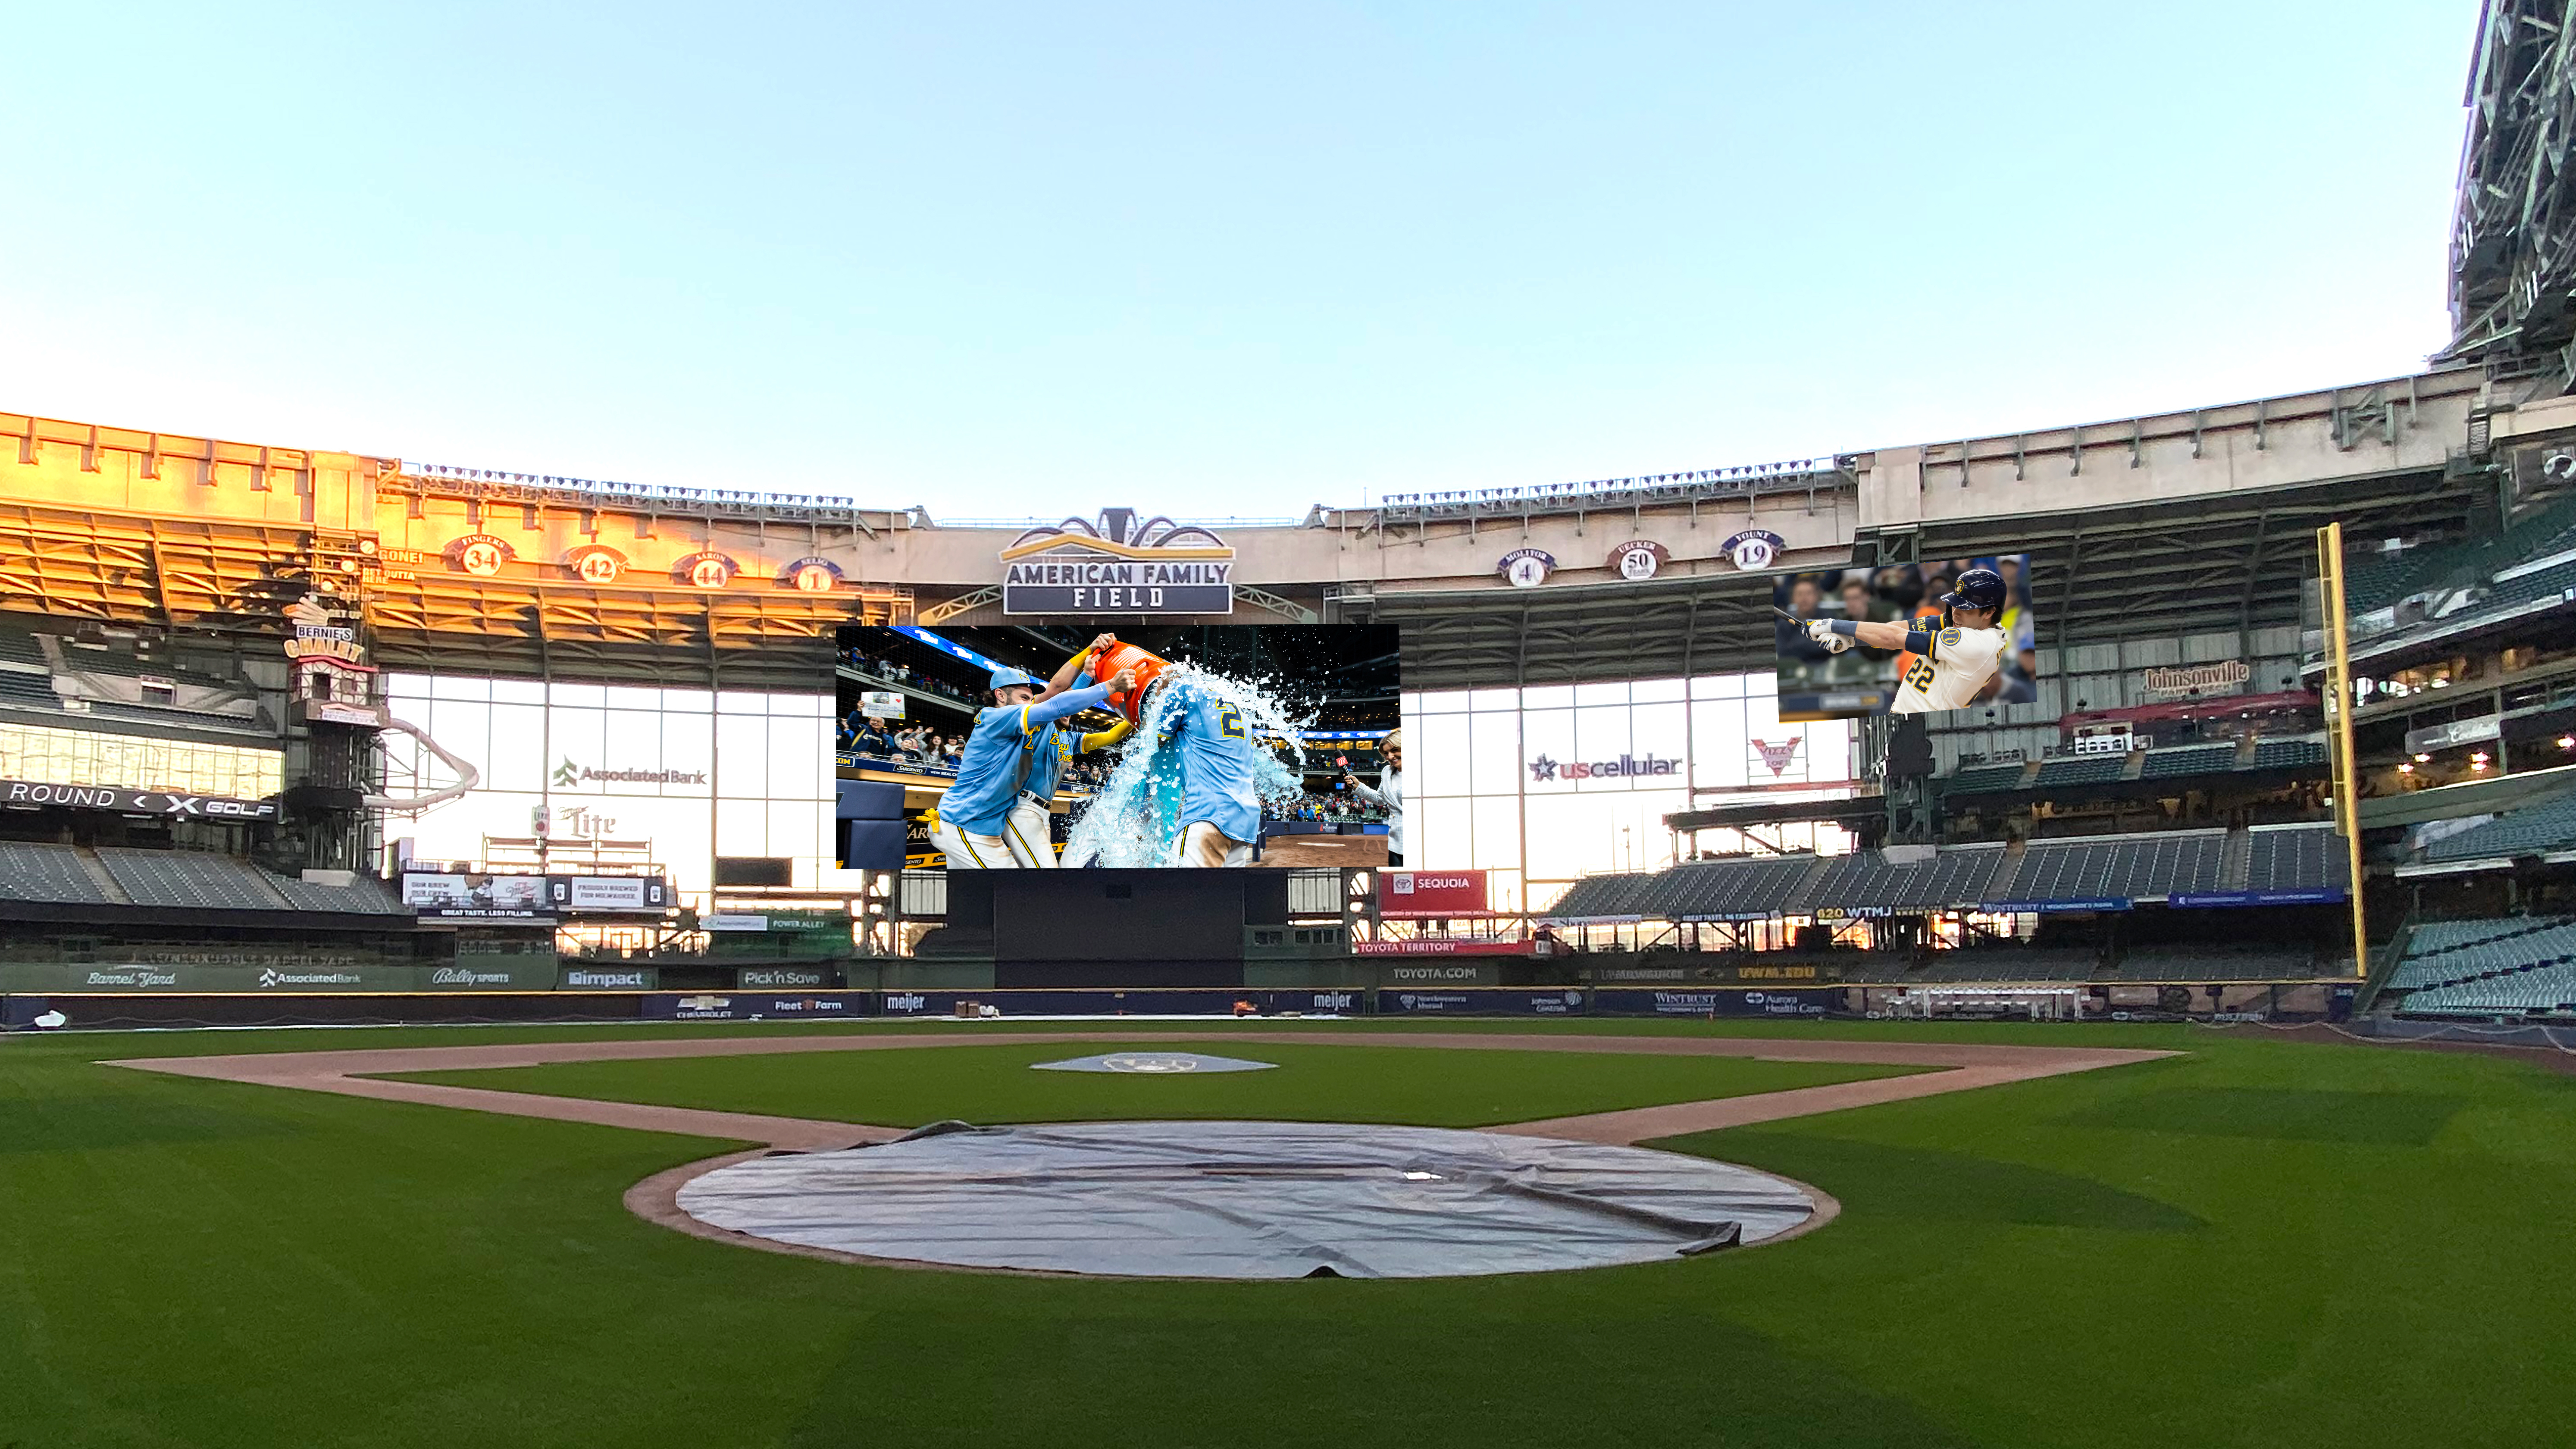 Brewers Home Opener at American Family Field showcases new parking system and stadium enhancements